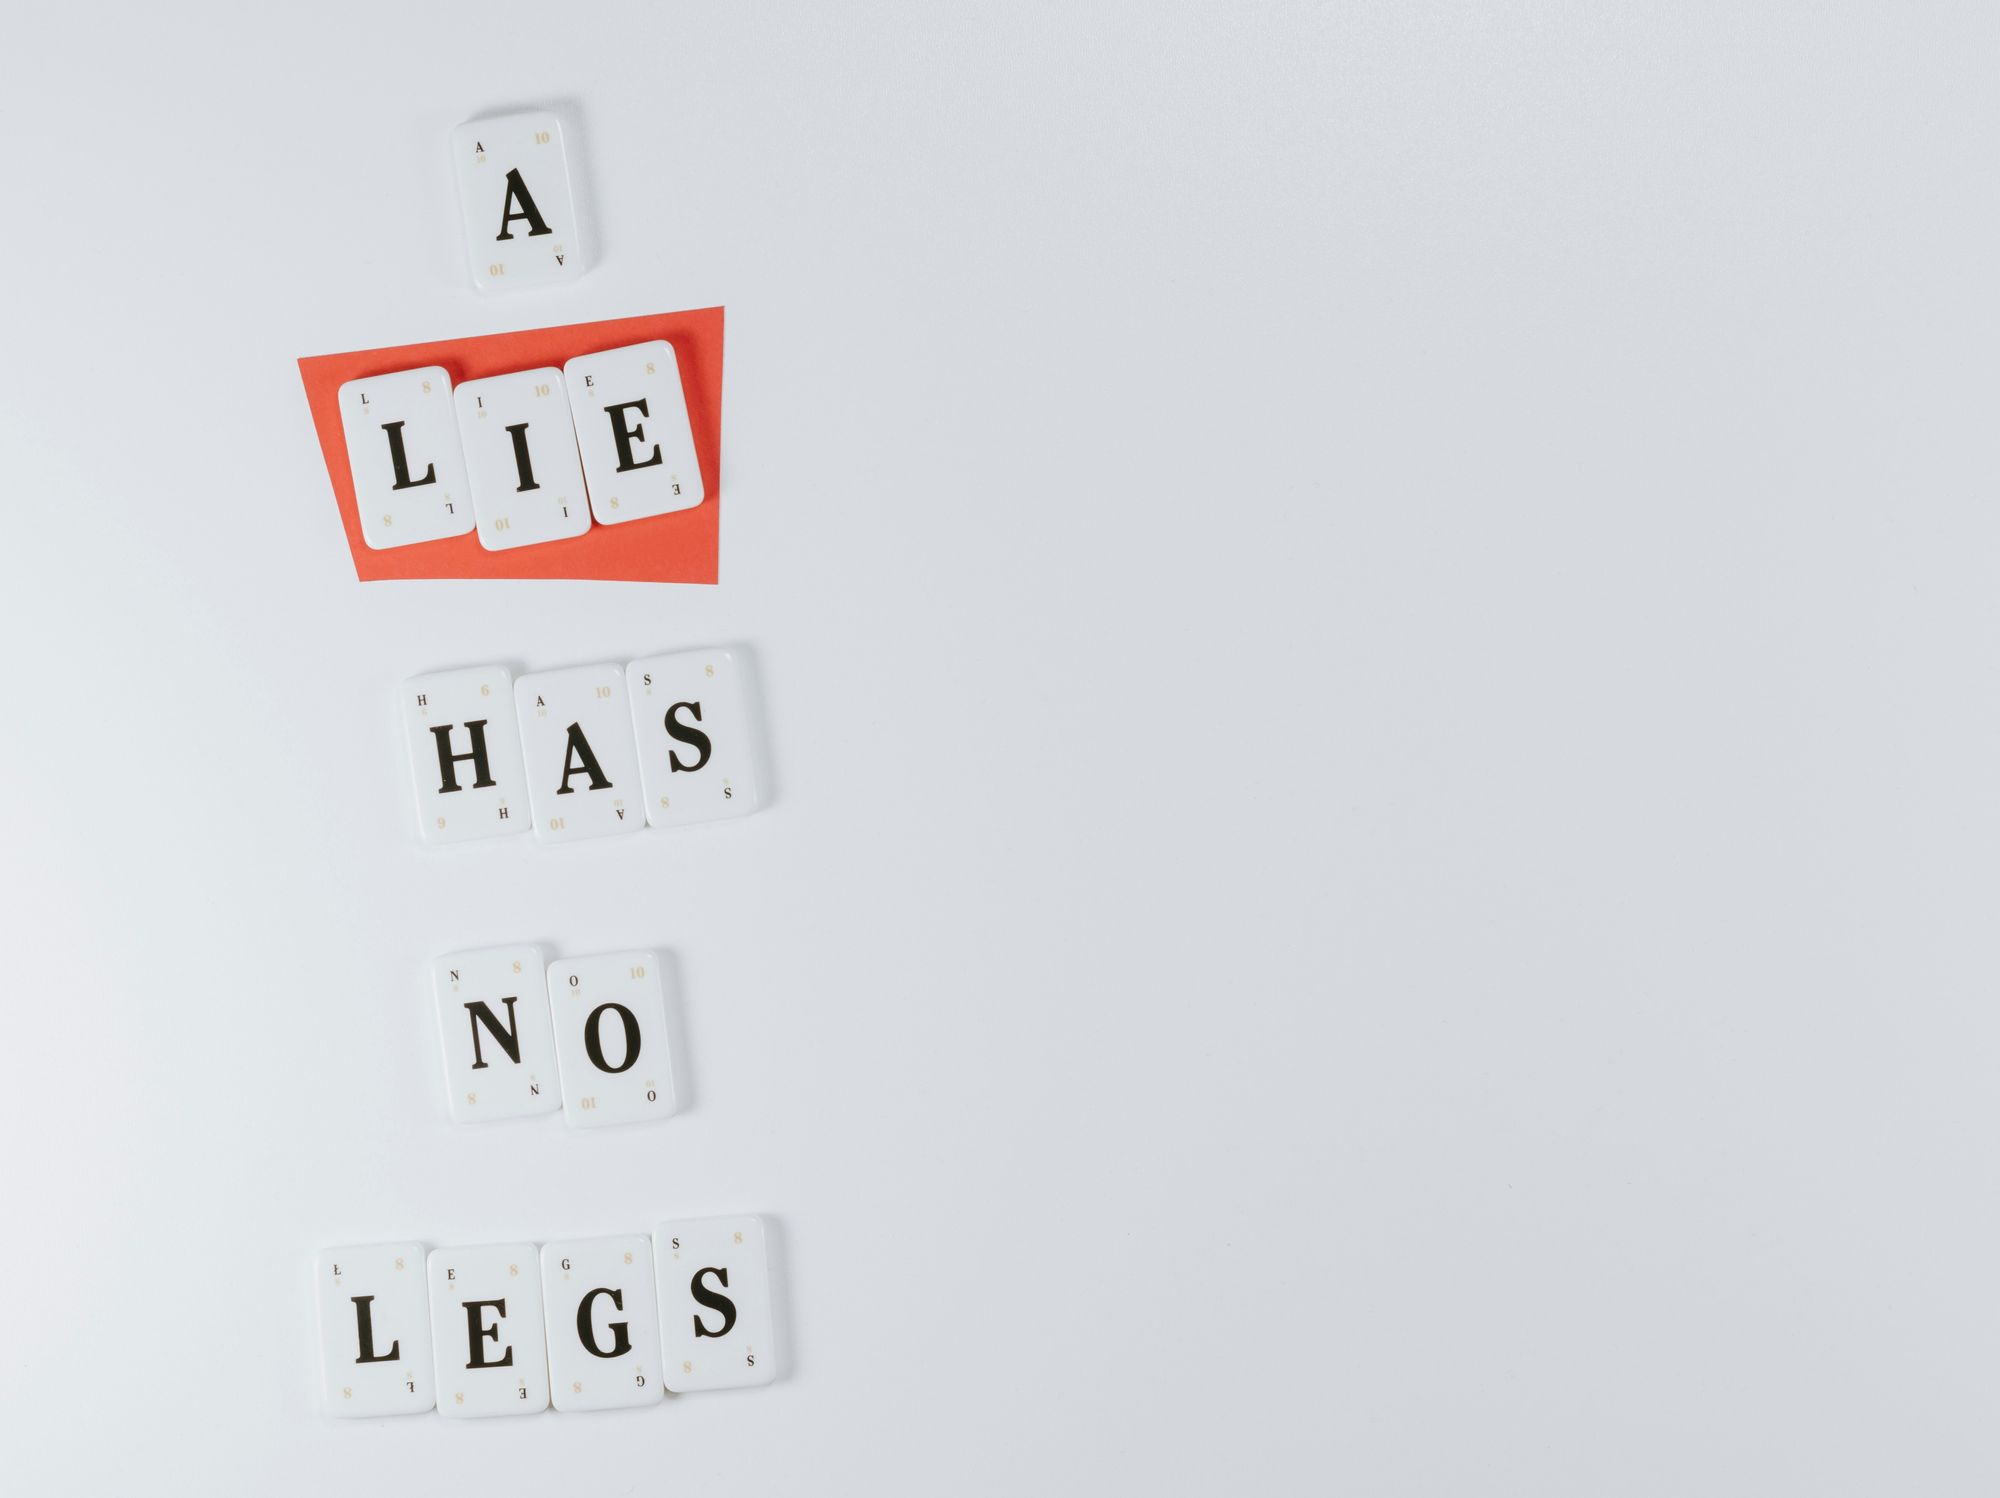 image with the phrase "a lie has no legs"